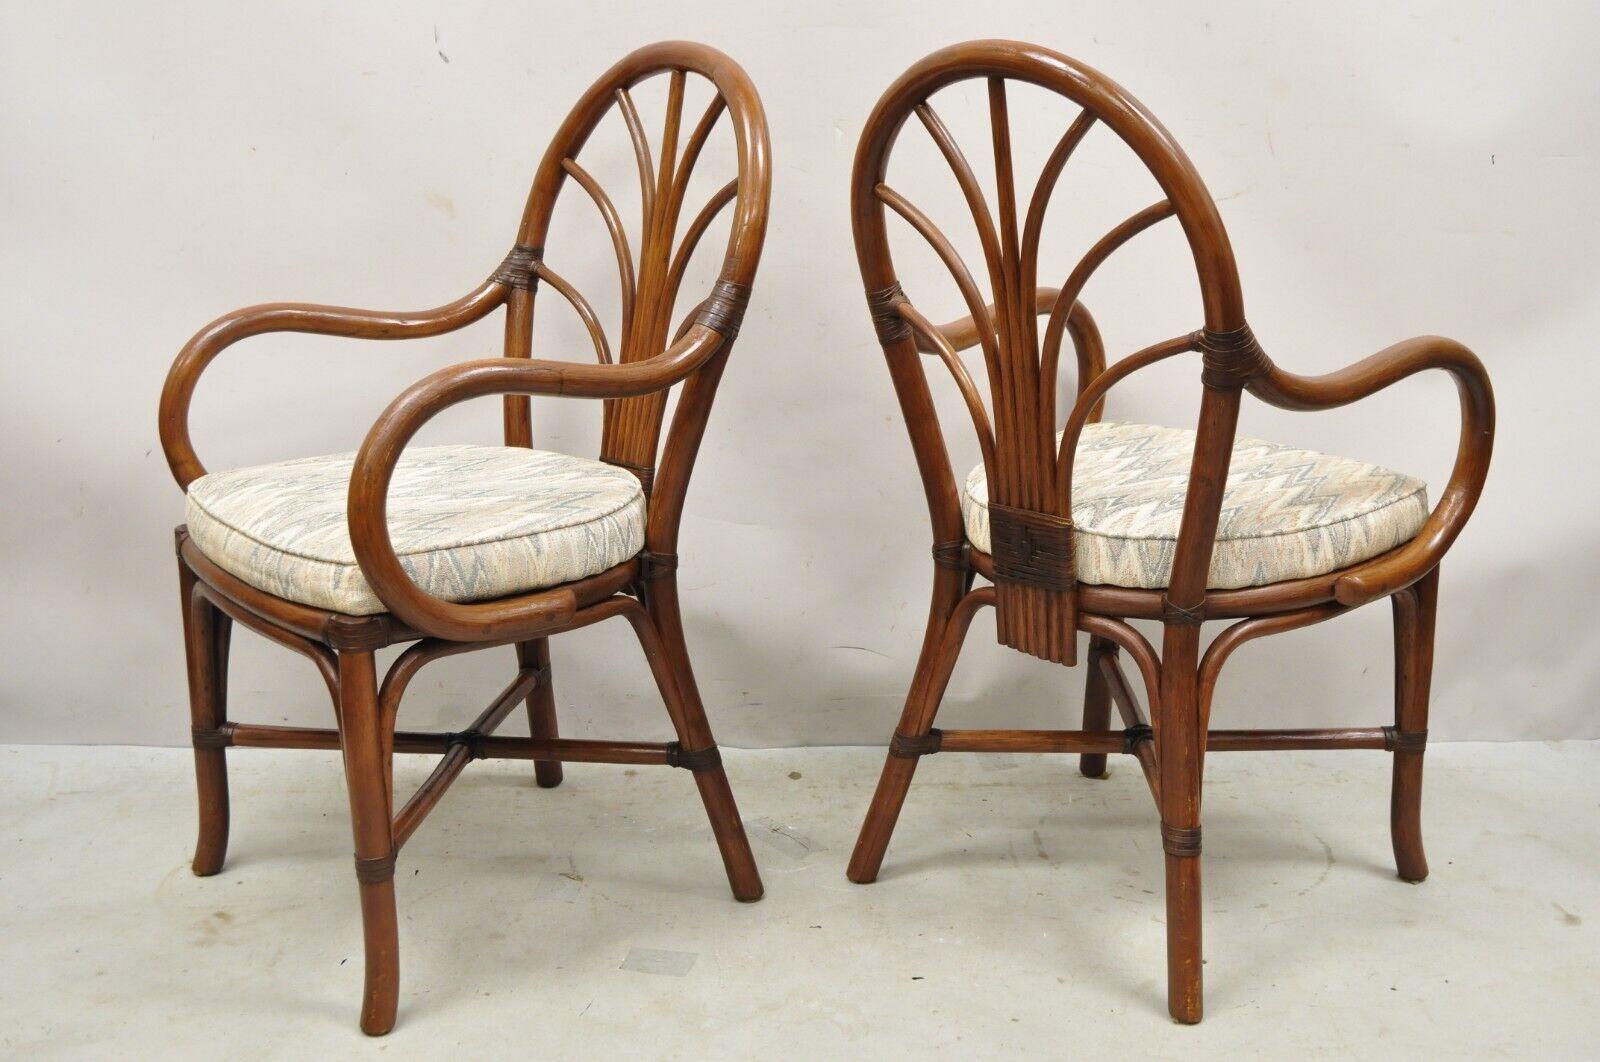 Vintage Bentwood Rattan Hollywood Regency Fan Back Dining Chairs - Set of 4. Circa Late 20th Century. Measurements: 36